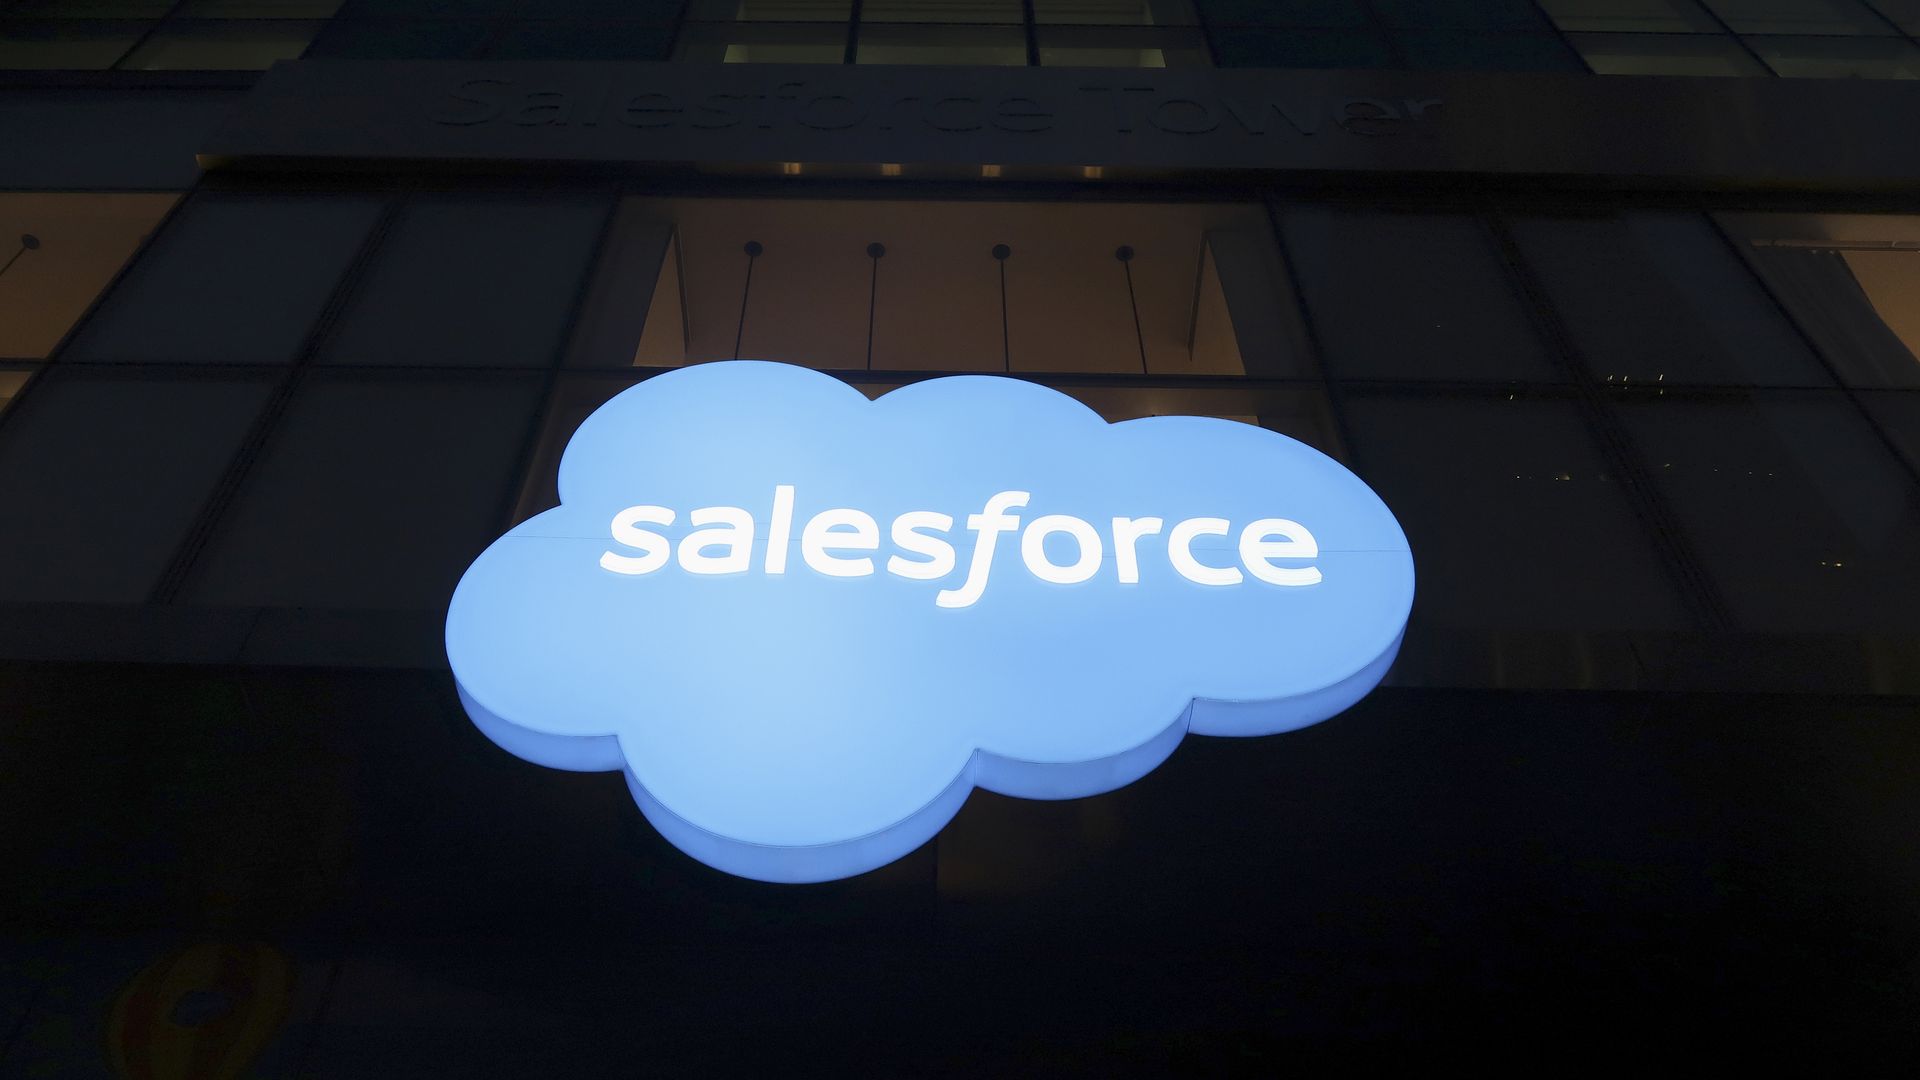 Photo of Salesforce logo on side of a dark building